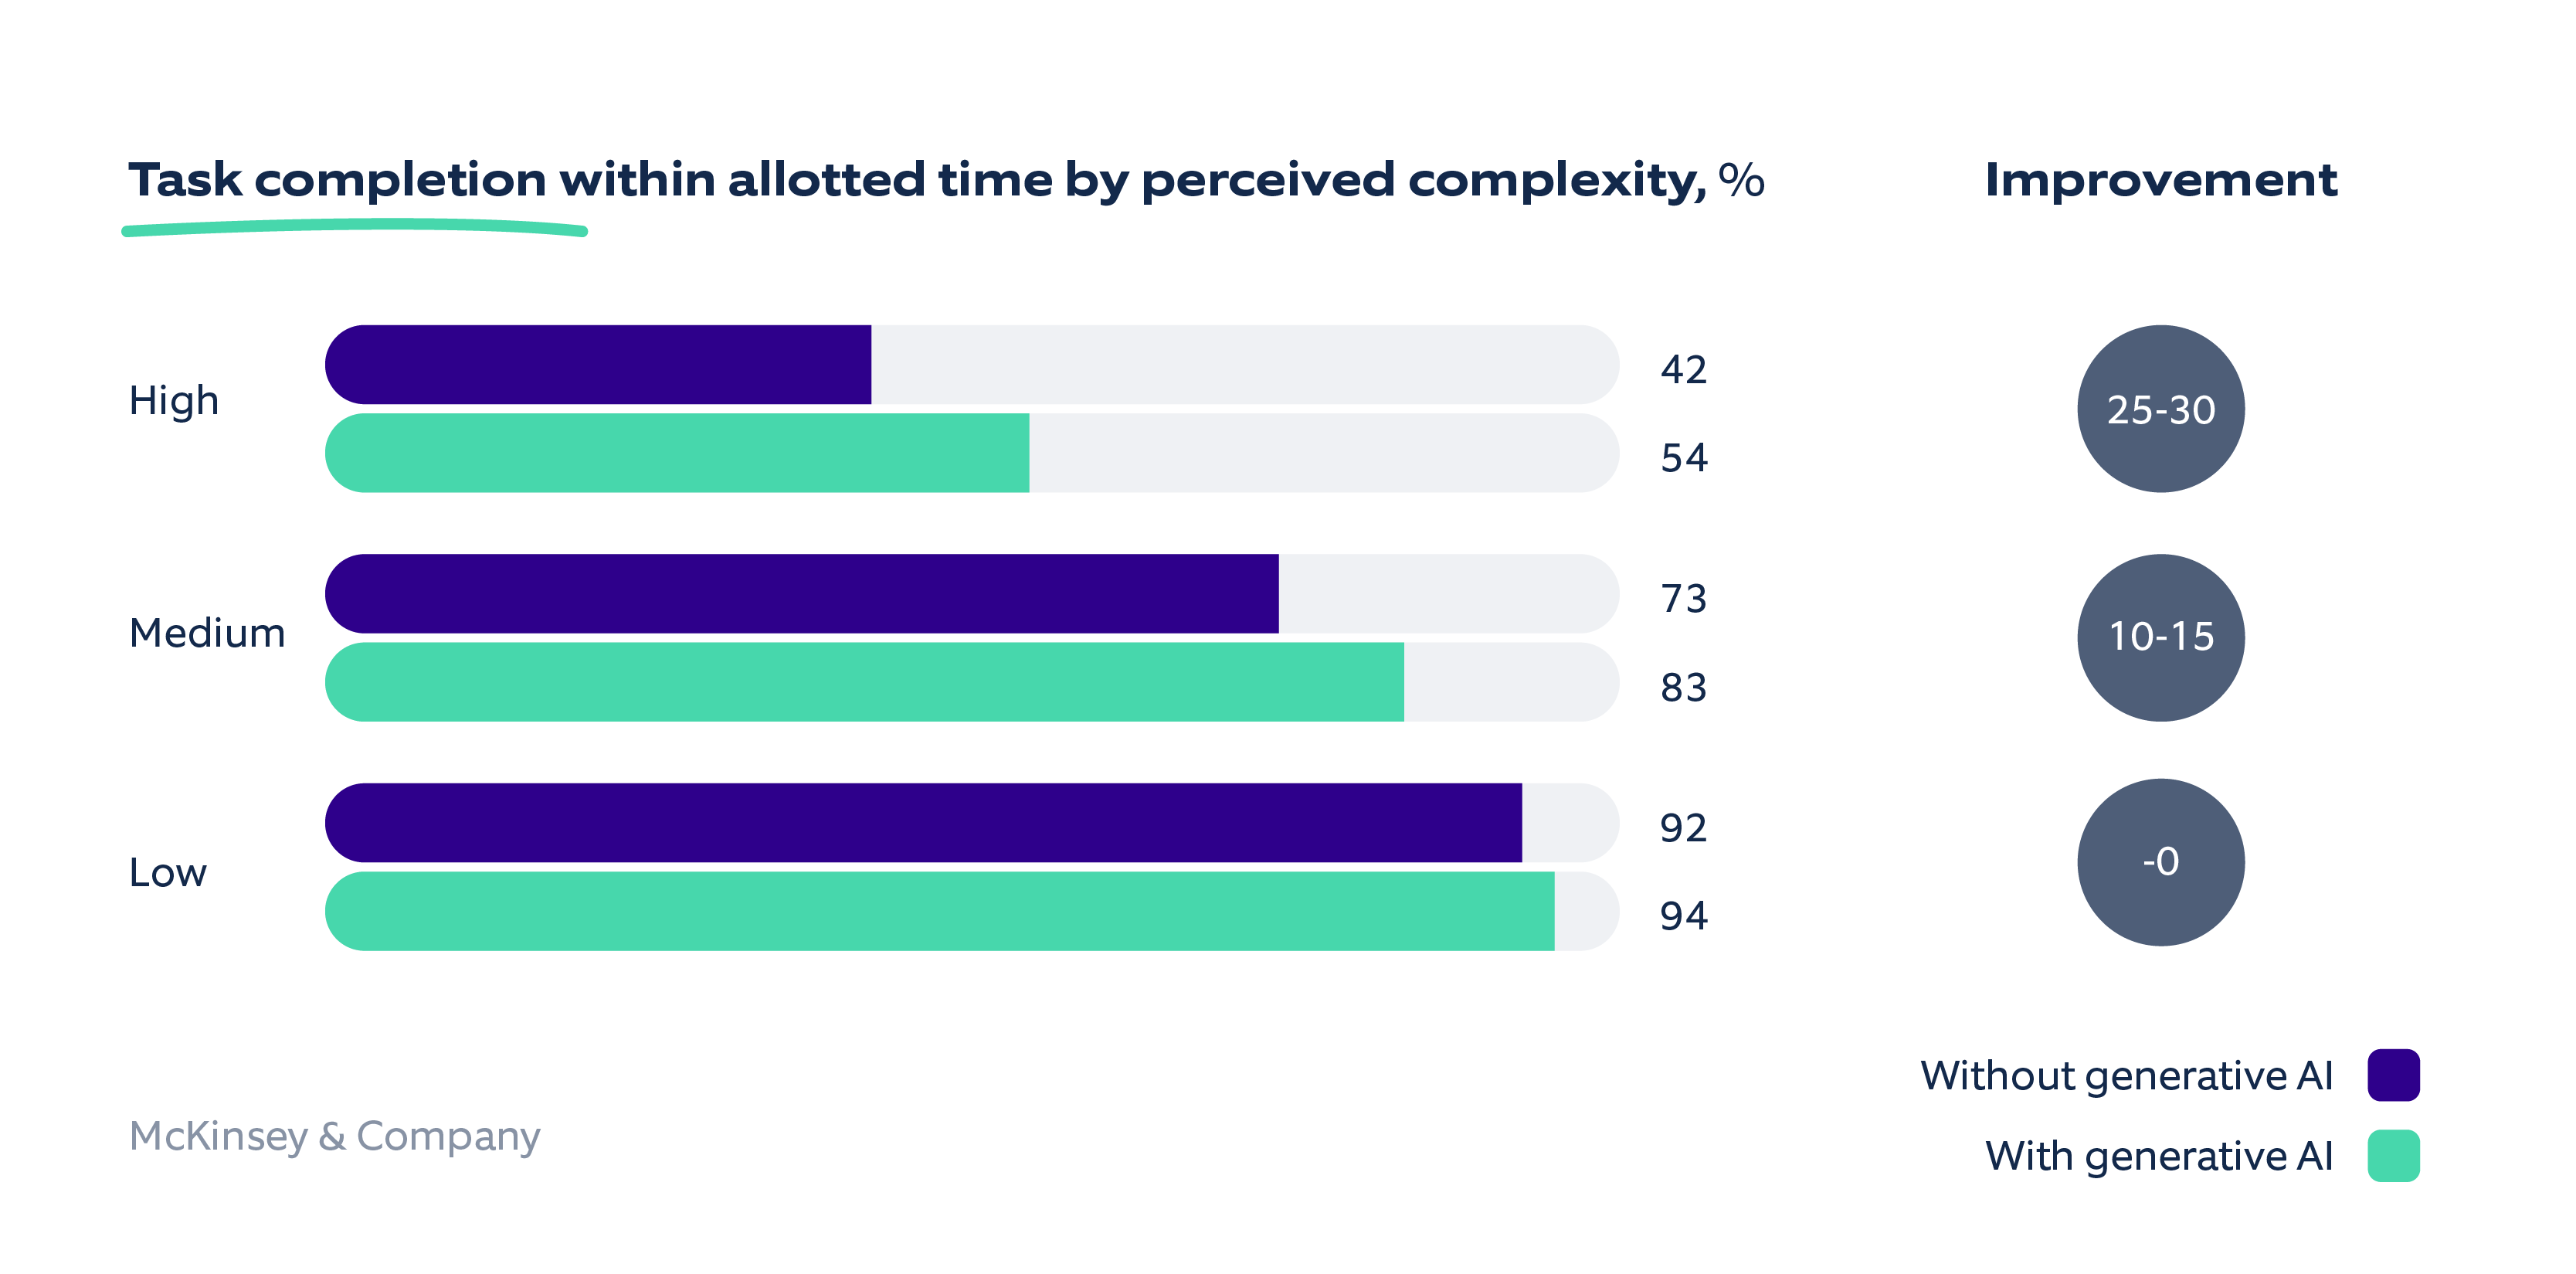 Task completion within allotted time by perceived complexity with the help of AI